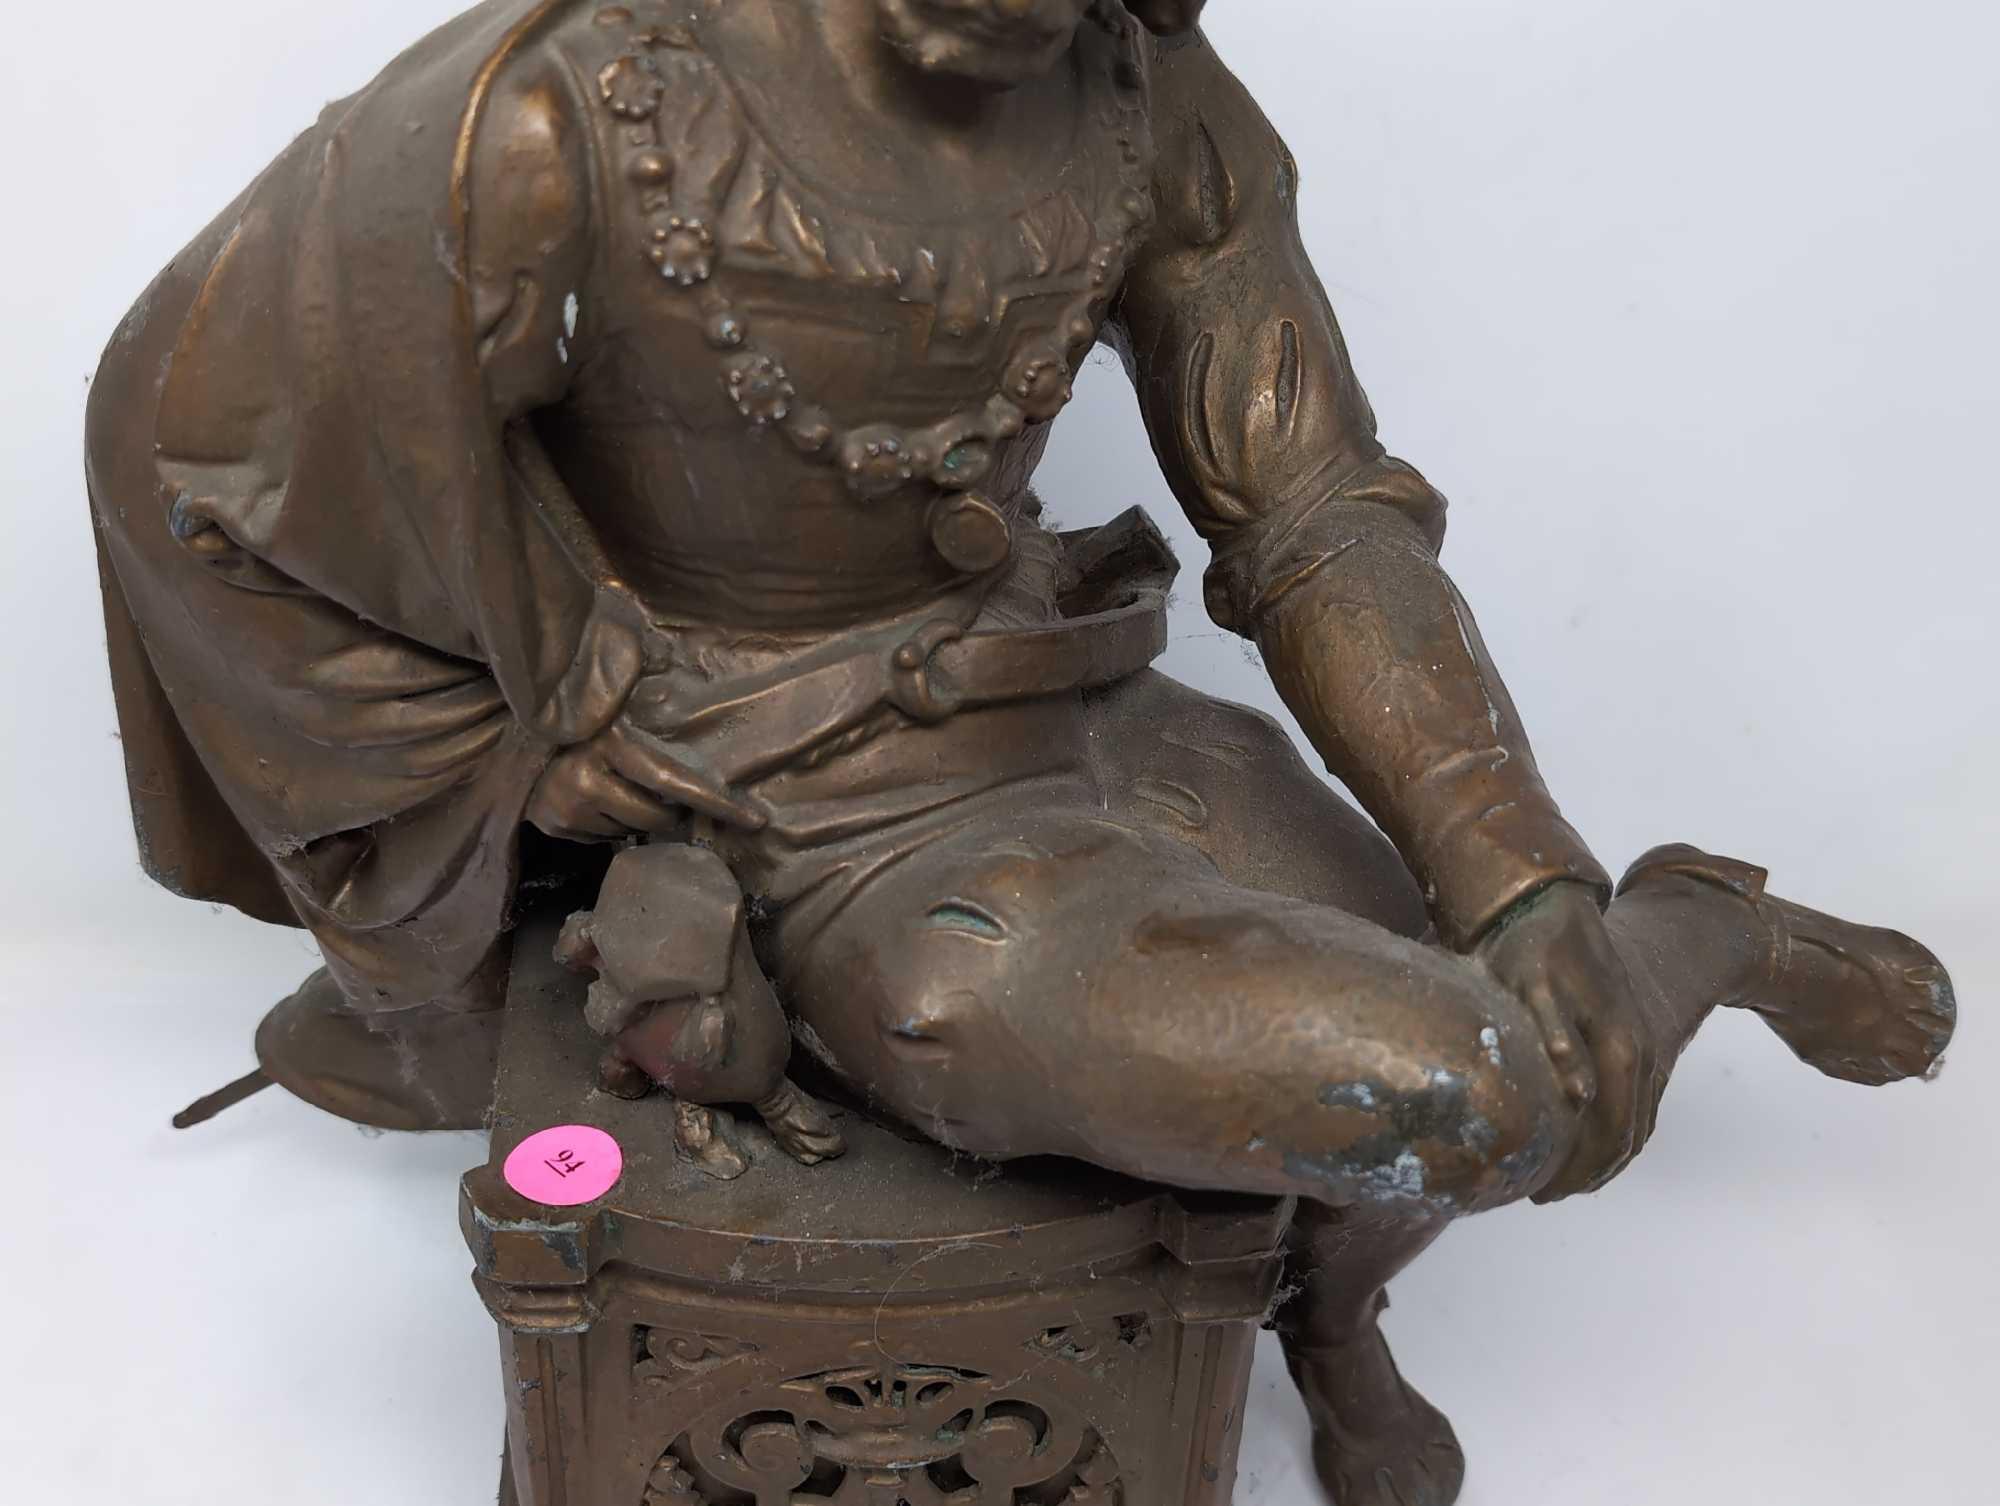 (FOYER) ANTIQUE VICTORIAN SPELTER STATUE DEPICTING AN ENGLISHMAN SITTING ON AN ORNATE BAT DETAILED